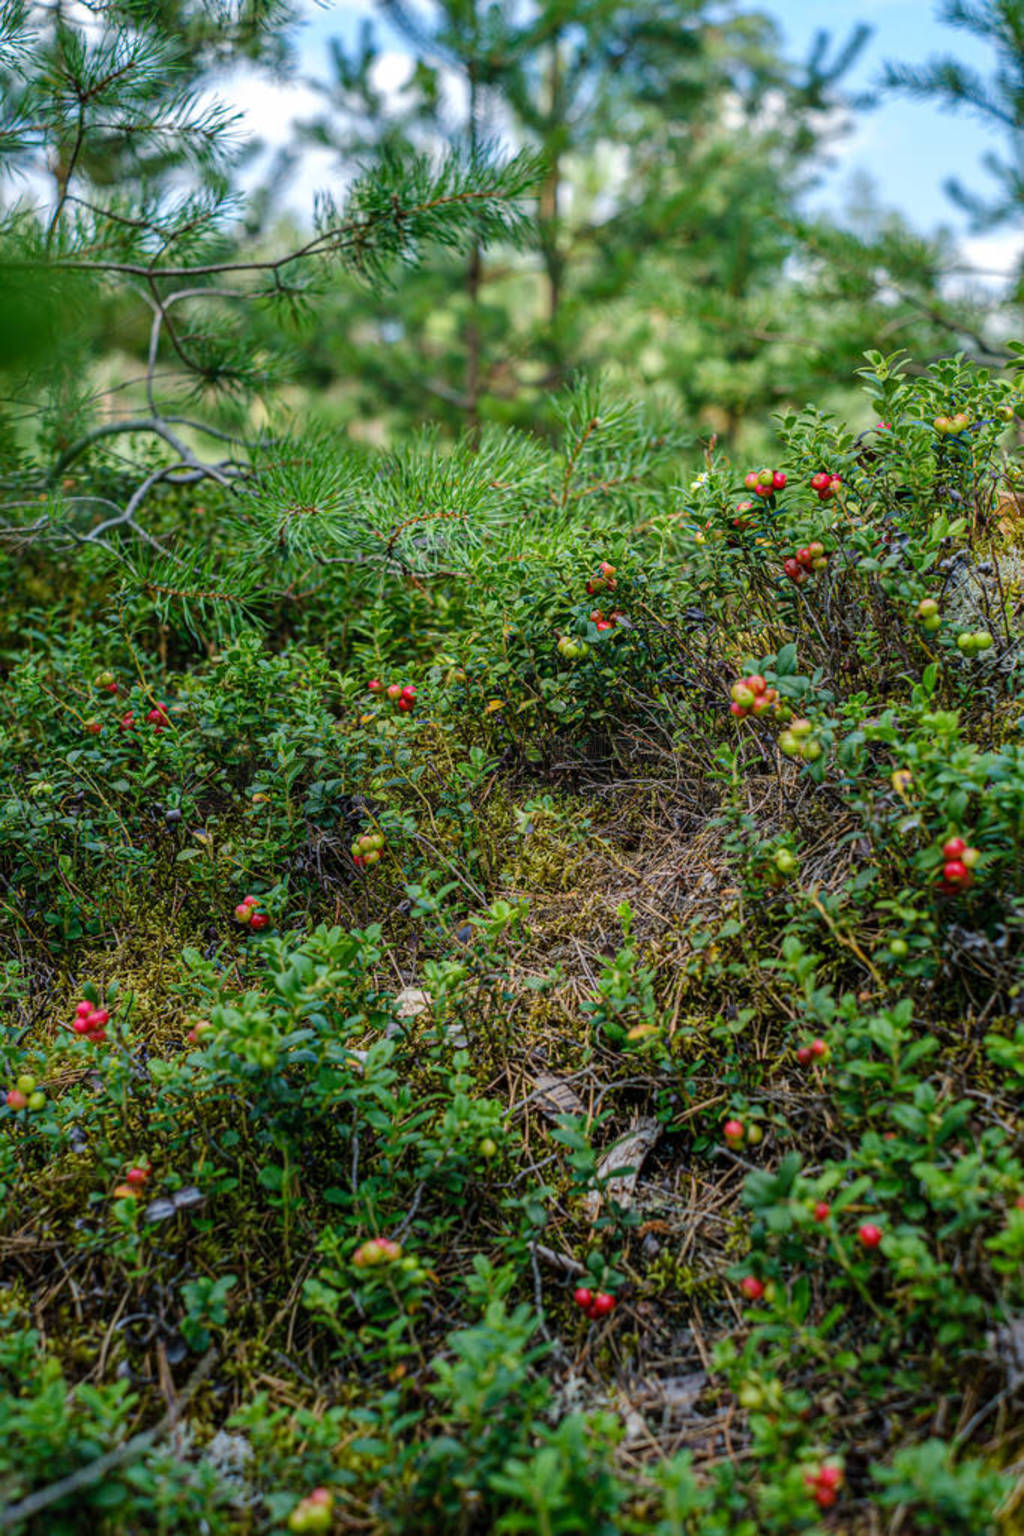 lingonberries cranberries on green moss in forest near dry tree